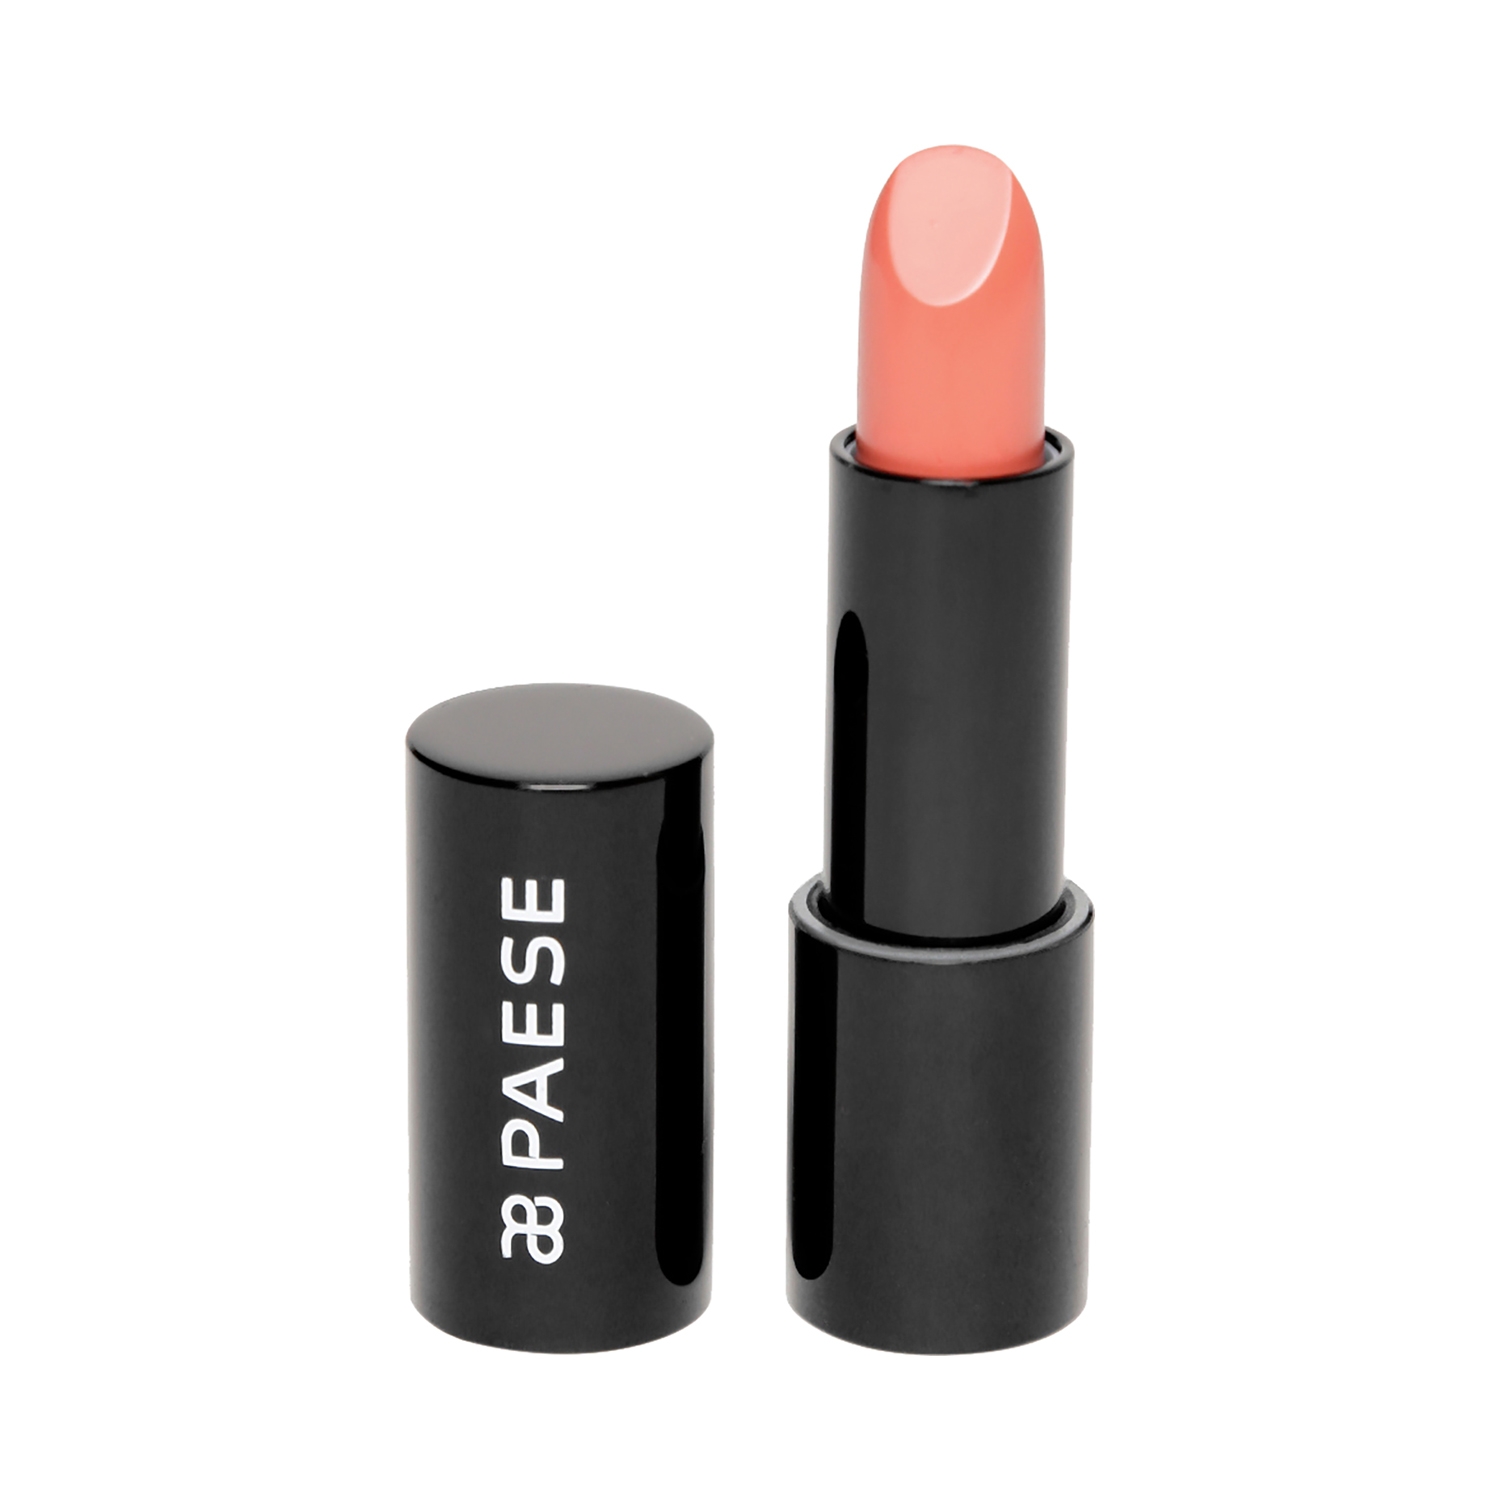 Paese Cosmetics Lipstick with Argan Oil - 10 Shade (4.3g)